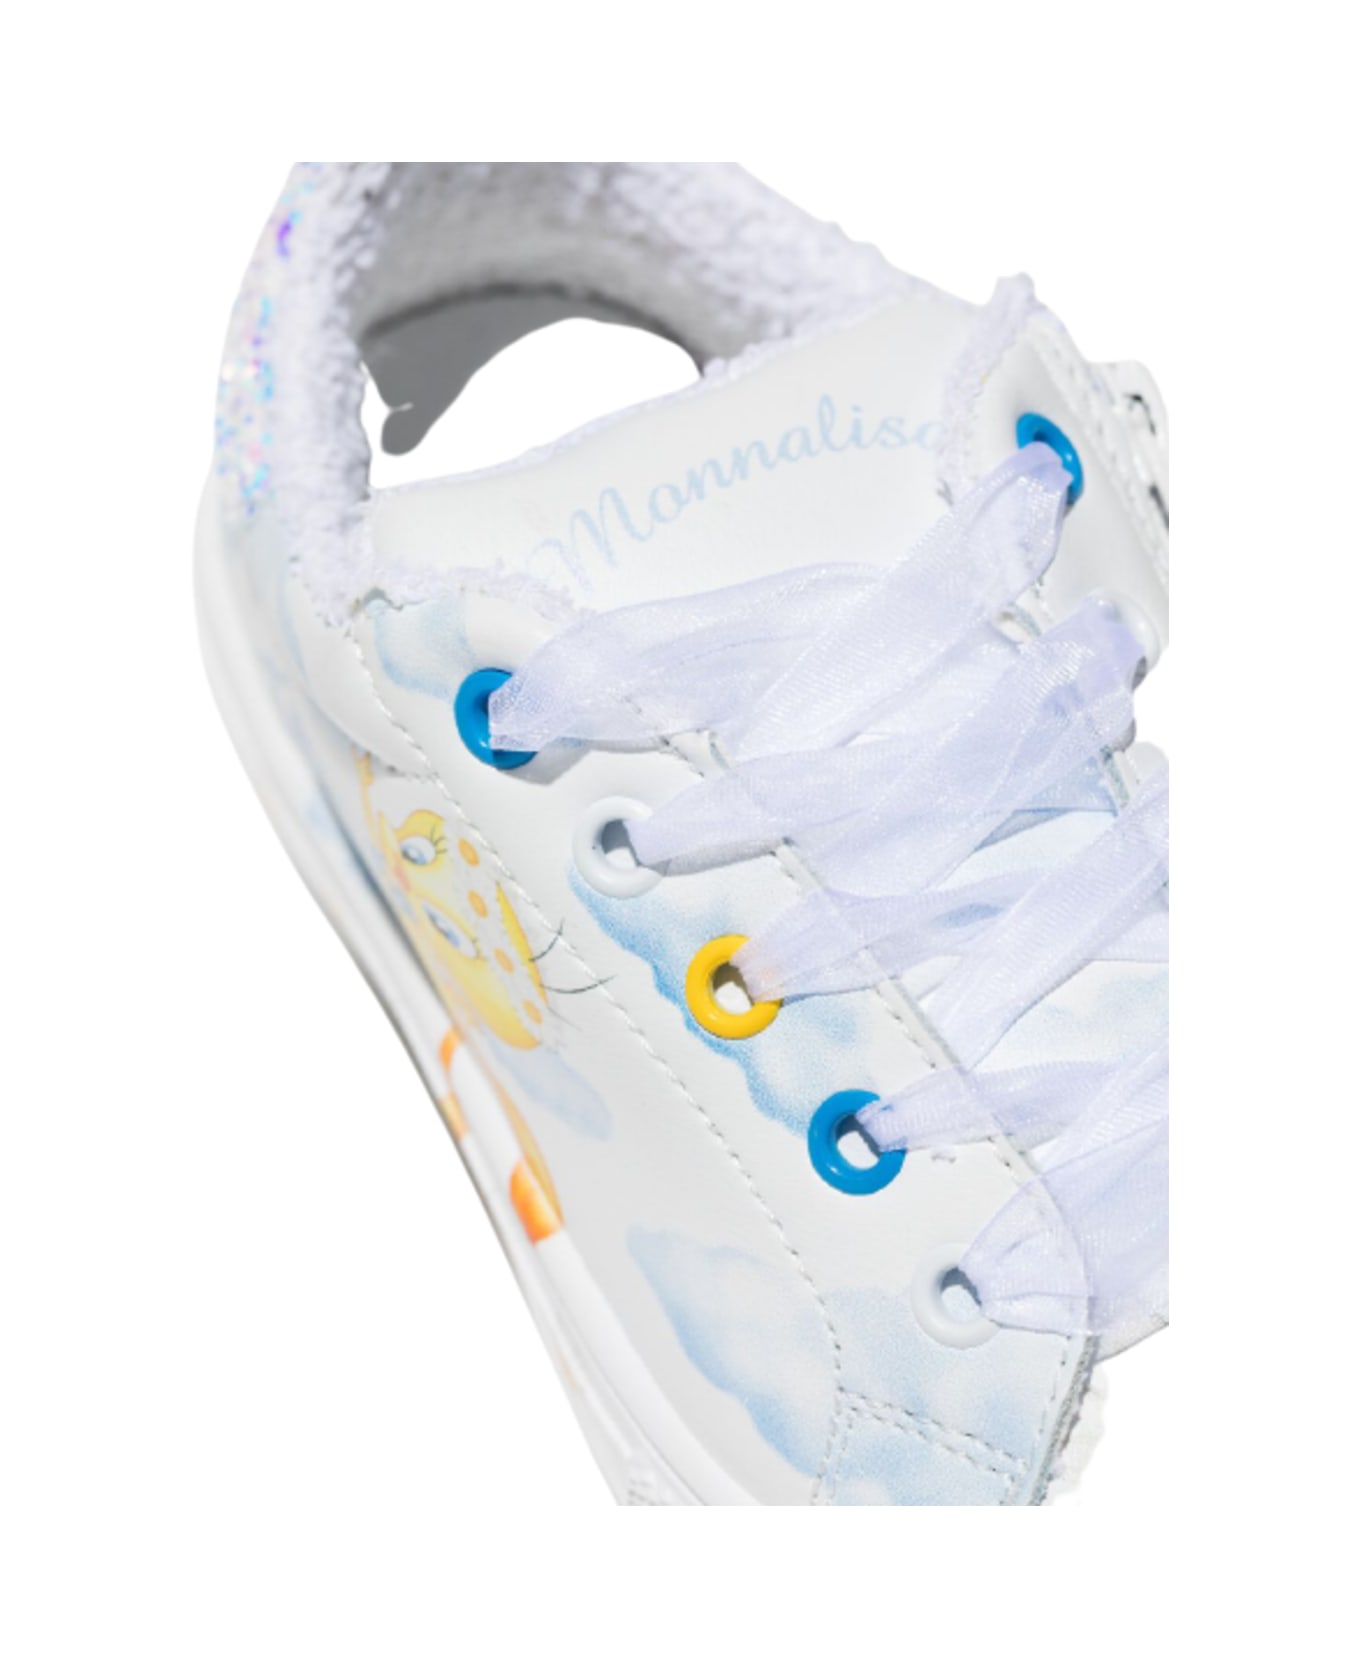 Monnalisa White Leather Sneakers With Tweety Clouds Print - White